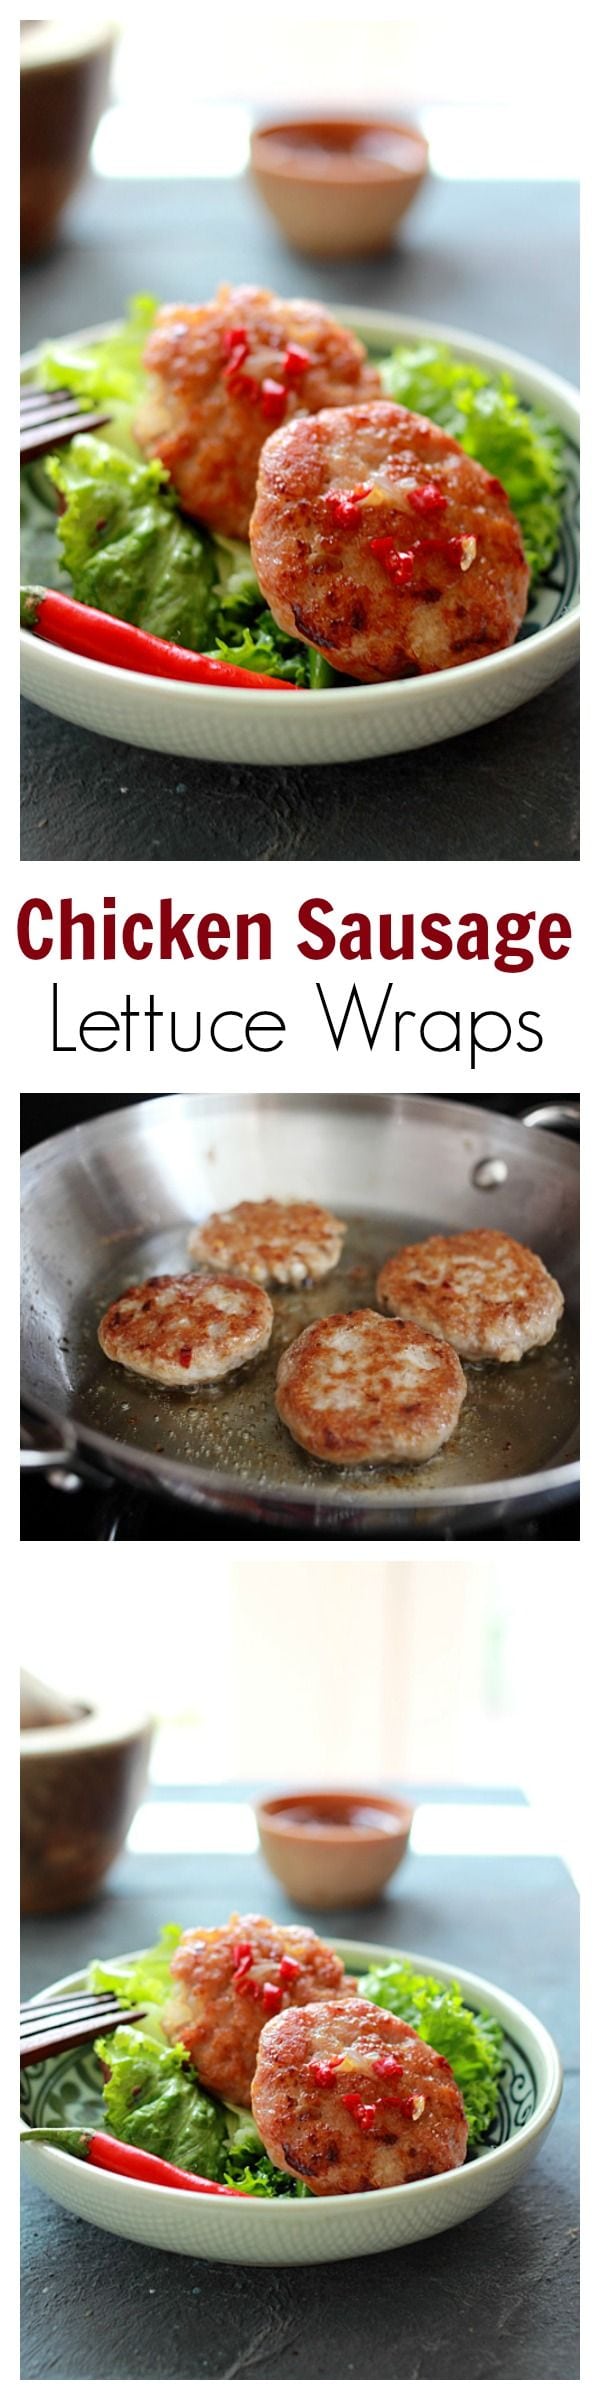 Chicken Sausage Lettuce Wraps - perfectly pan-fried chicken sausage patty wrapped with lettuce, so refreshing and yummy | rasamalaysia.com